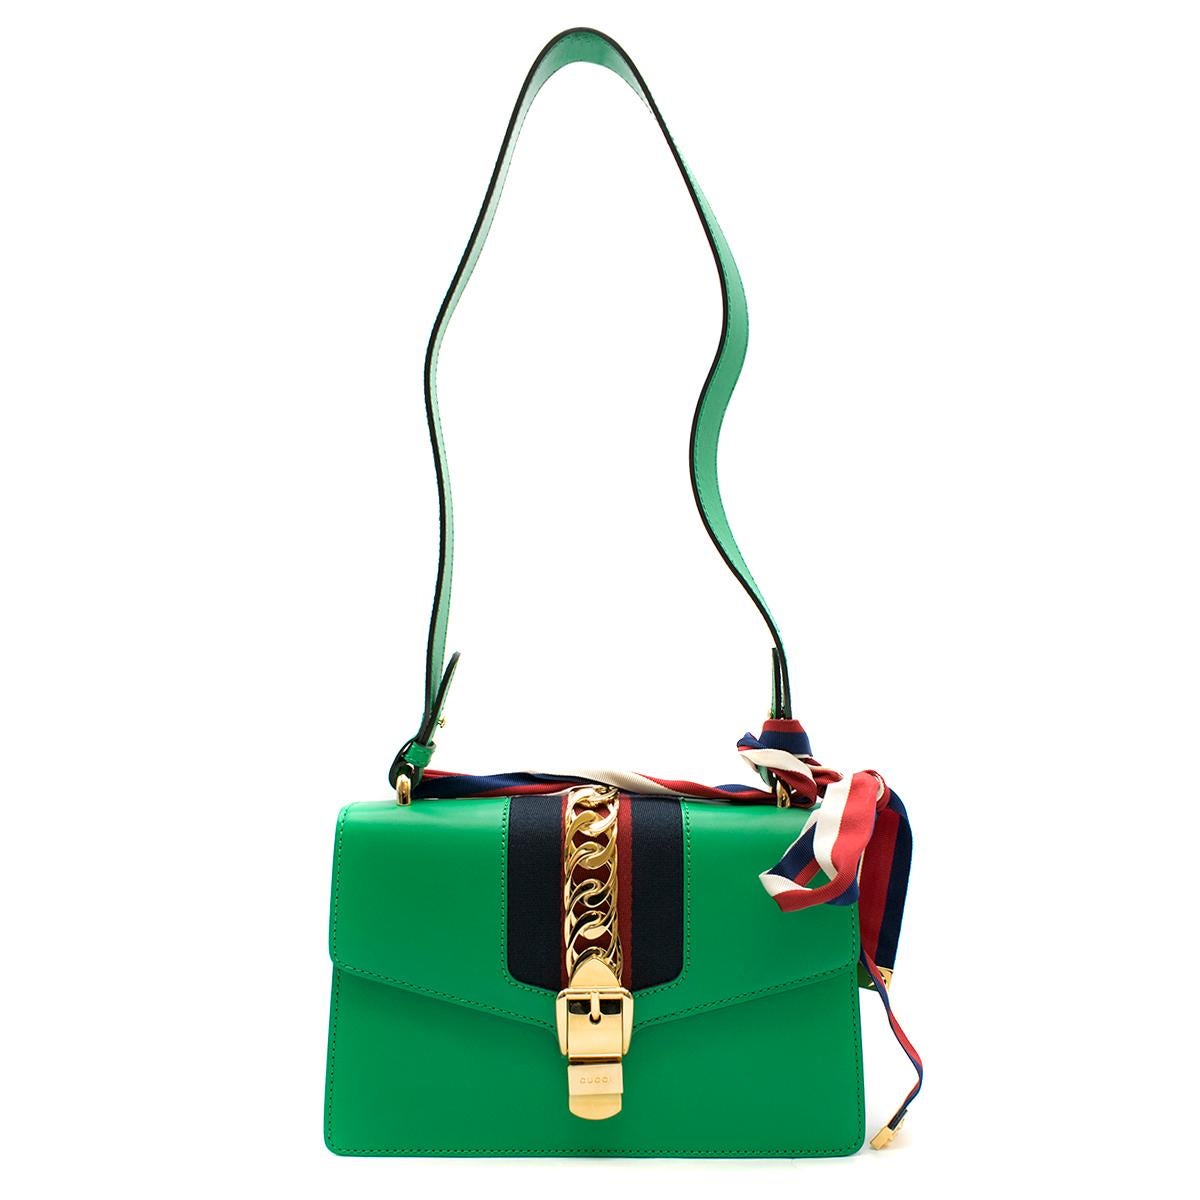 Gucci Sylvie Green Leather Small Shoulder Bag 3